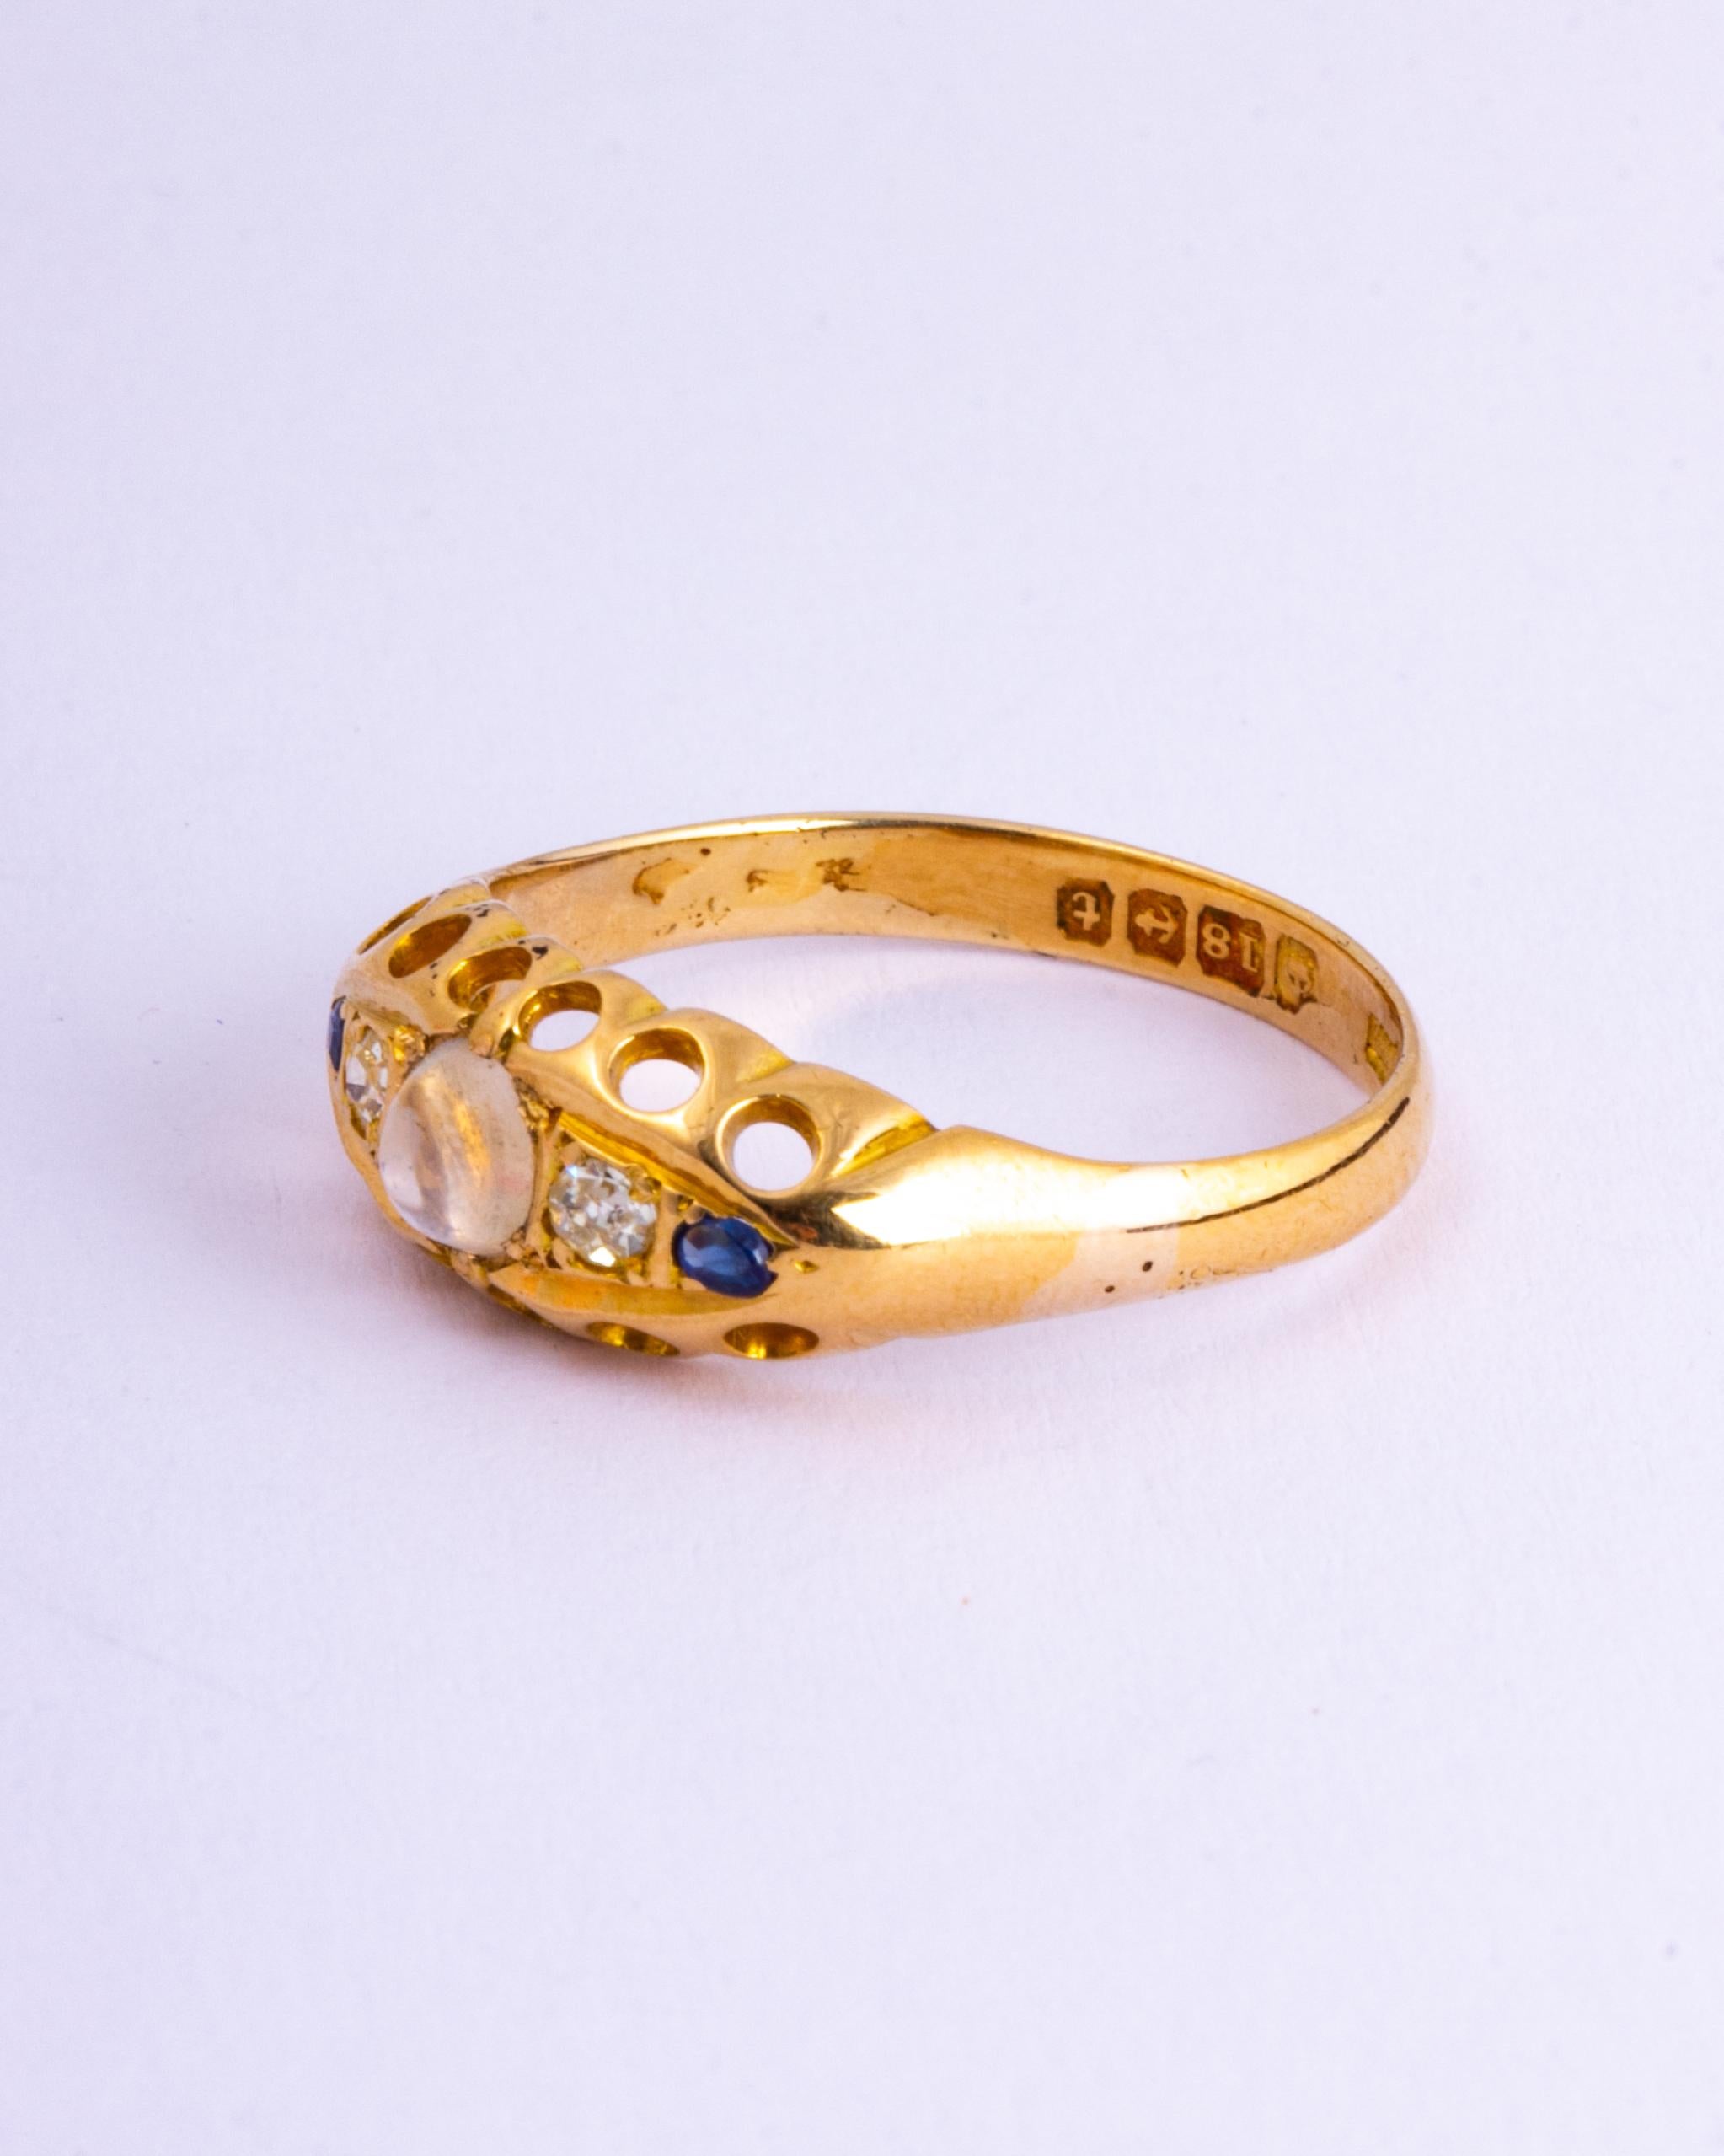 The ring holds two diamonds which total 8pts and there are also sapphire points on the outer edge. At the centre there is a moonstone which sits proud above the other stones. The ring is modelled in 18ct gold and the stones are set in a boat shaped